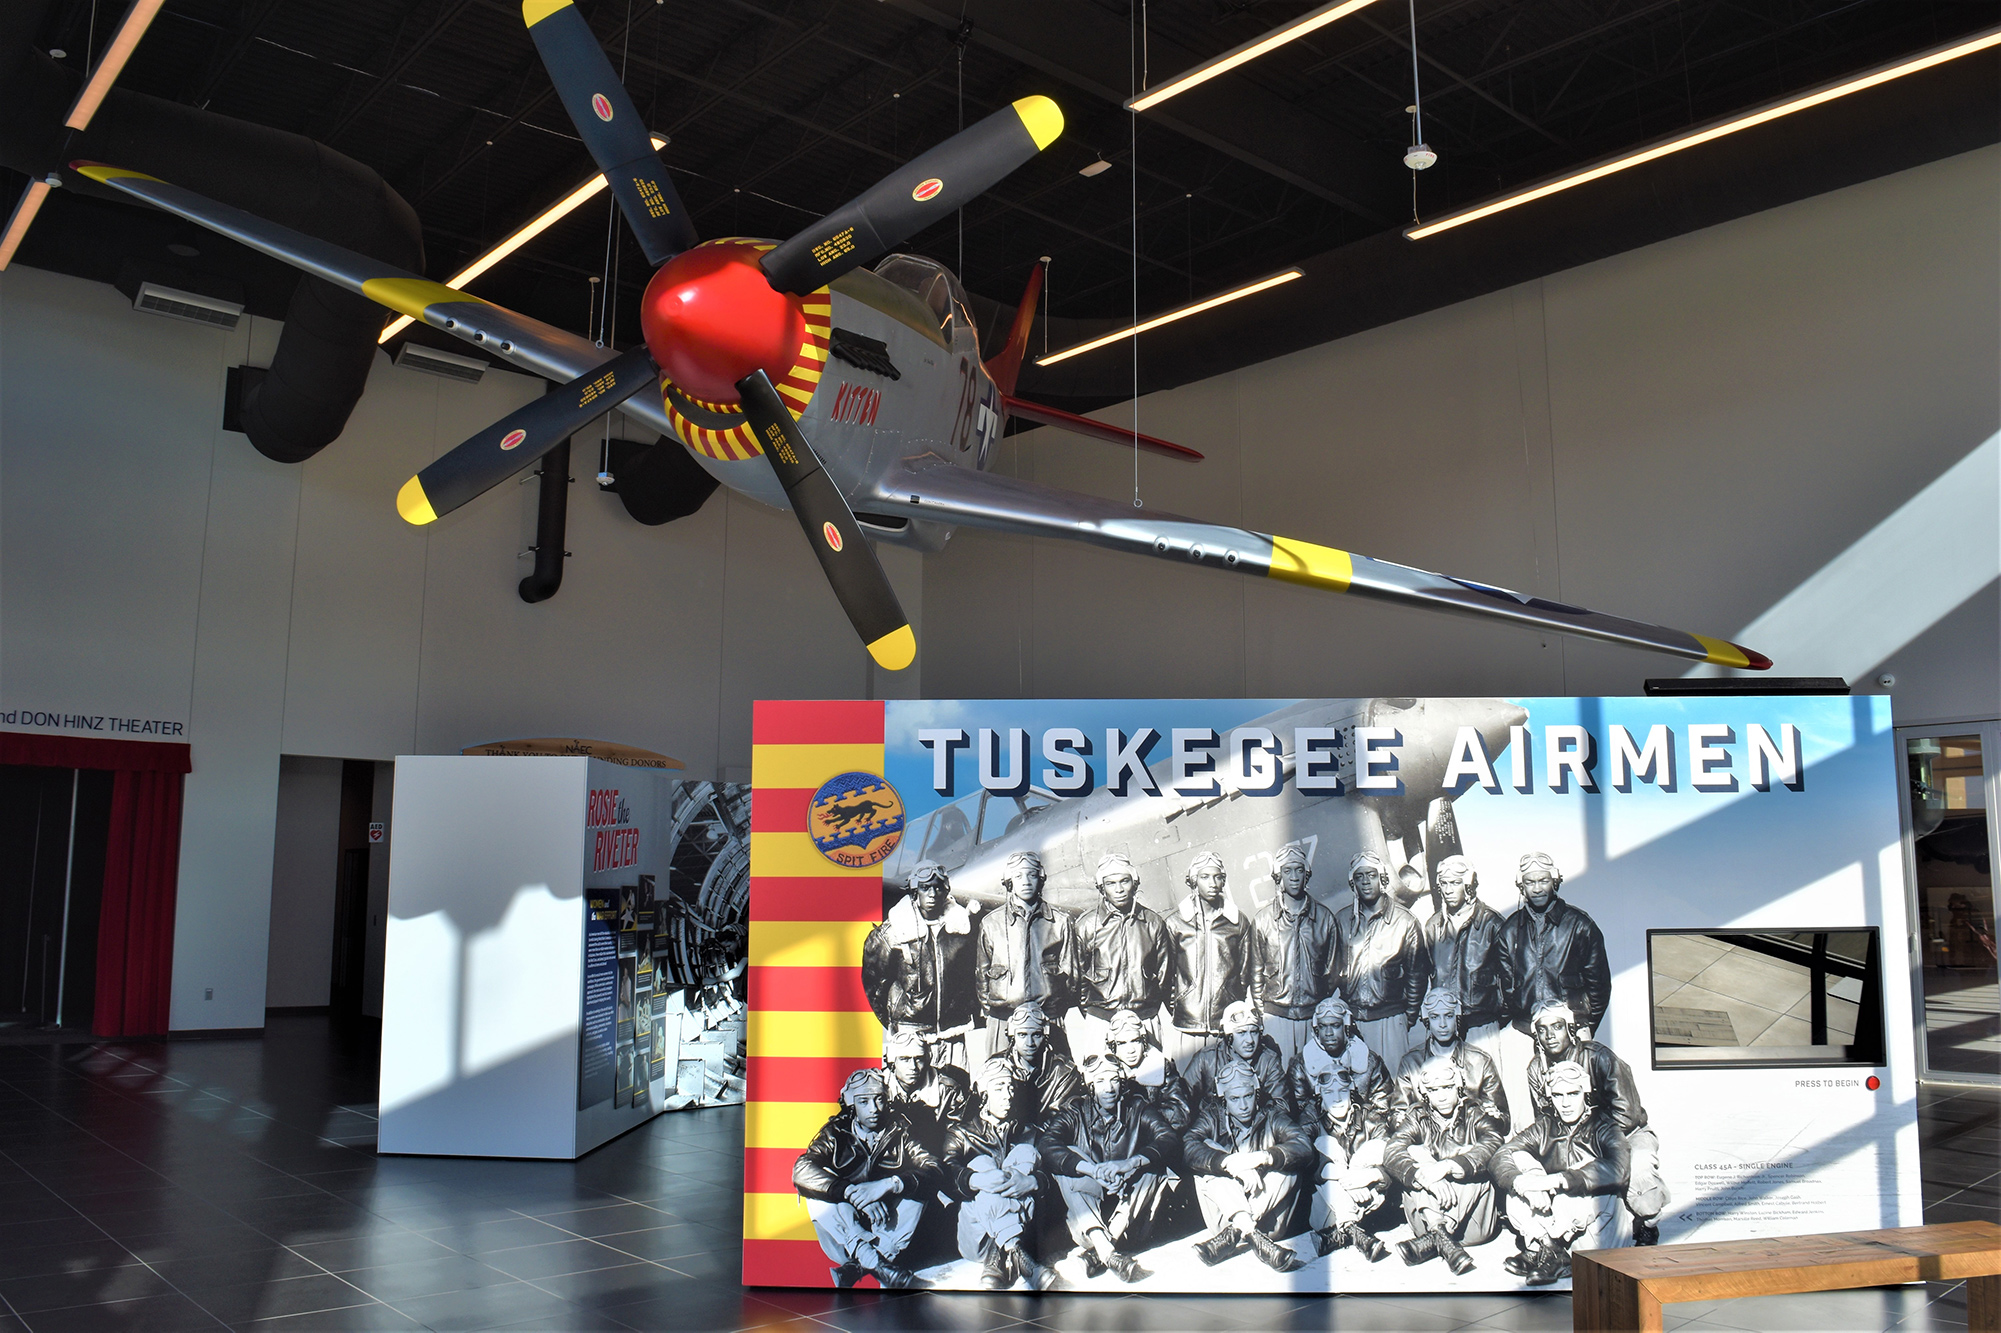 A display at the Commemorate Air Force museum about the Tuskegee Airmen, with an aircraft hanging from the ceiling and a large photo display on the right